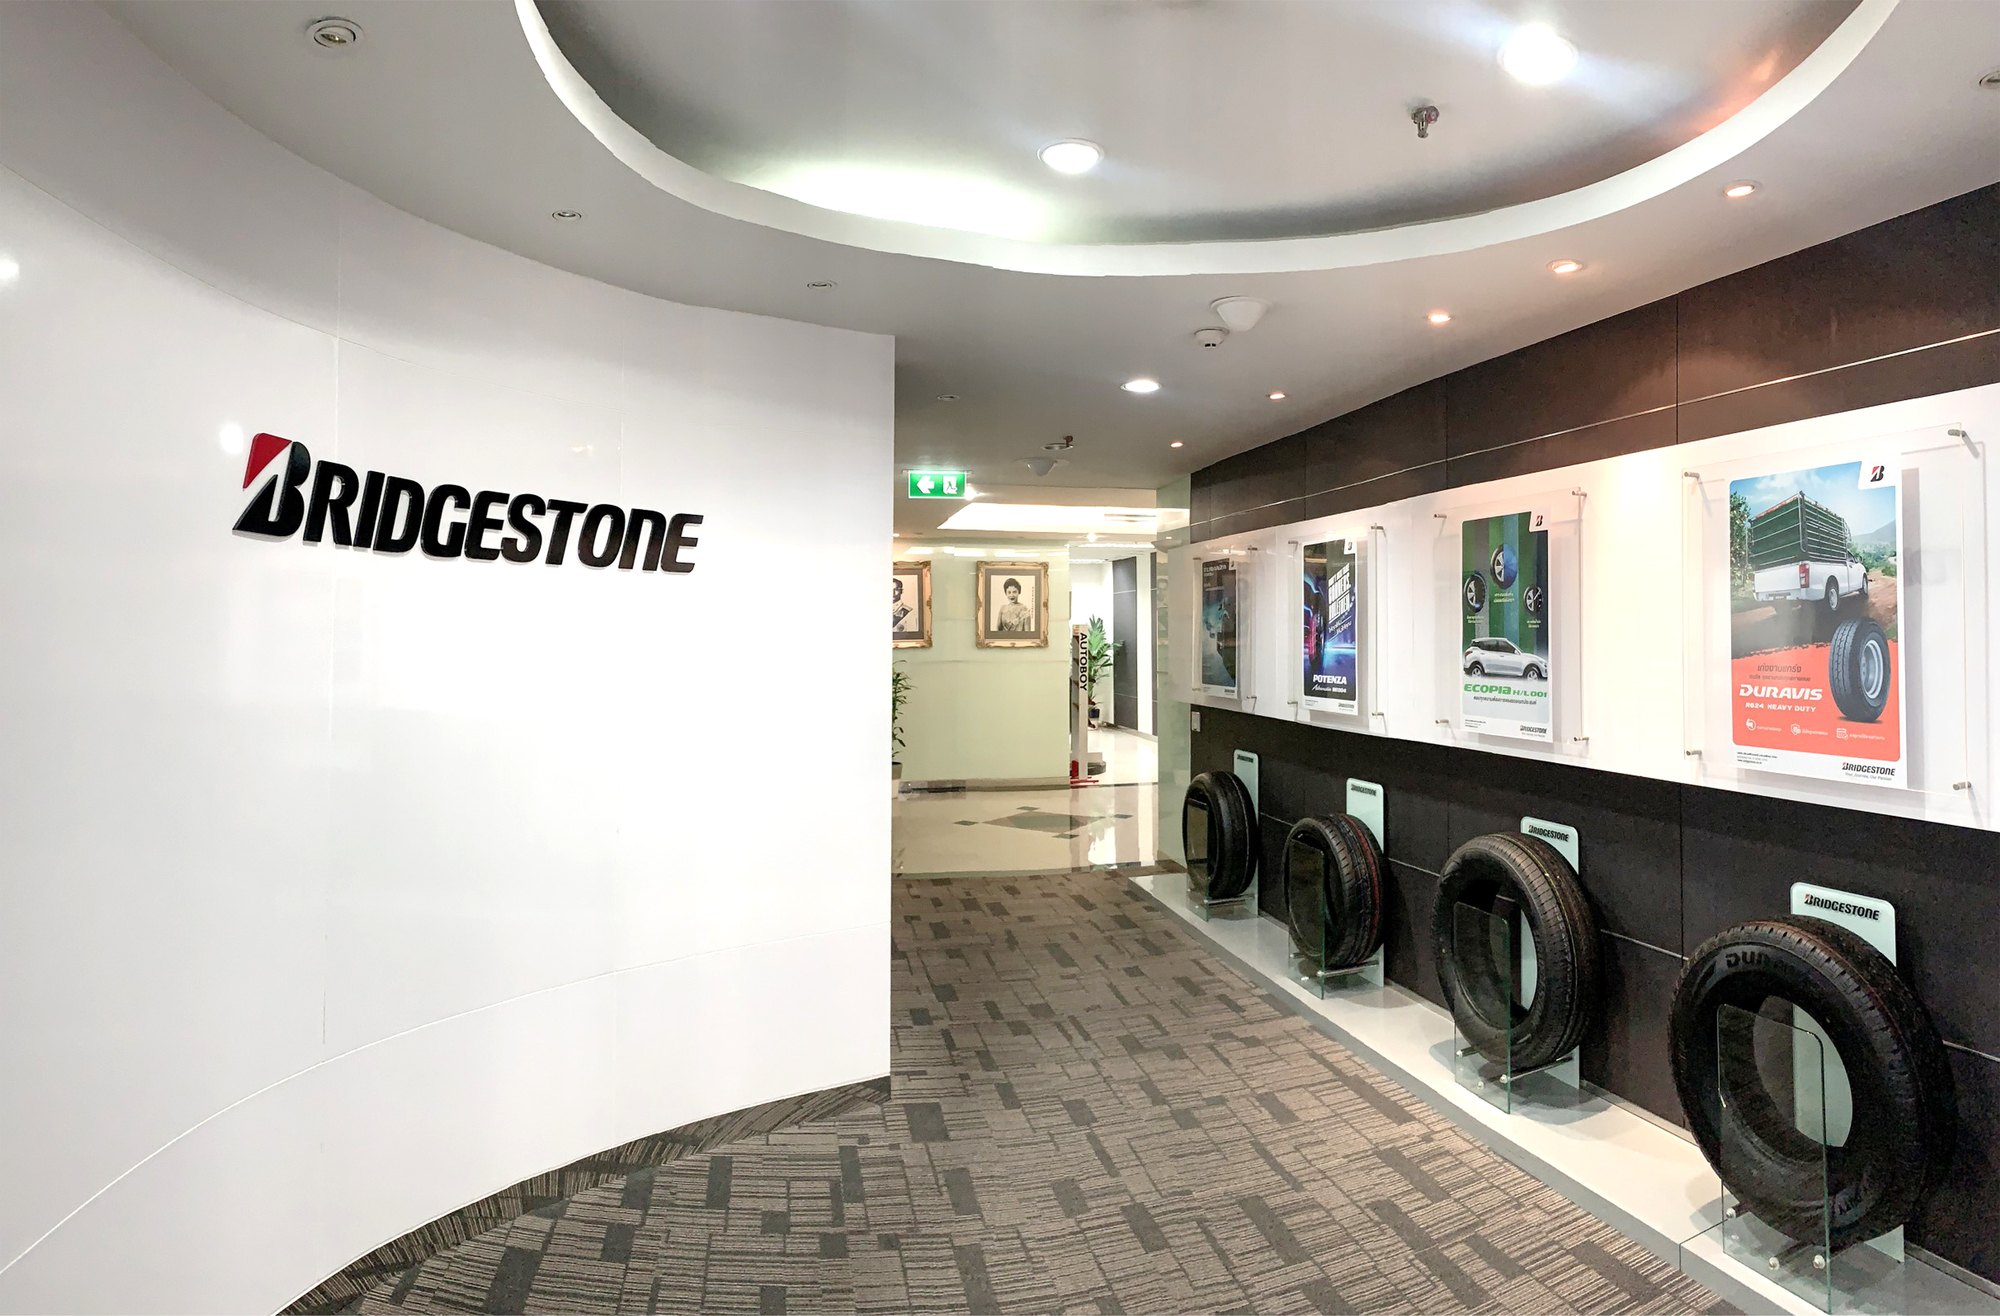 Bridgestone Sales Thailand makes smarter decisions with analytics available  from anywhere, at any time